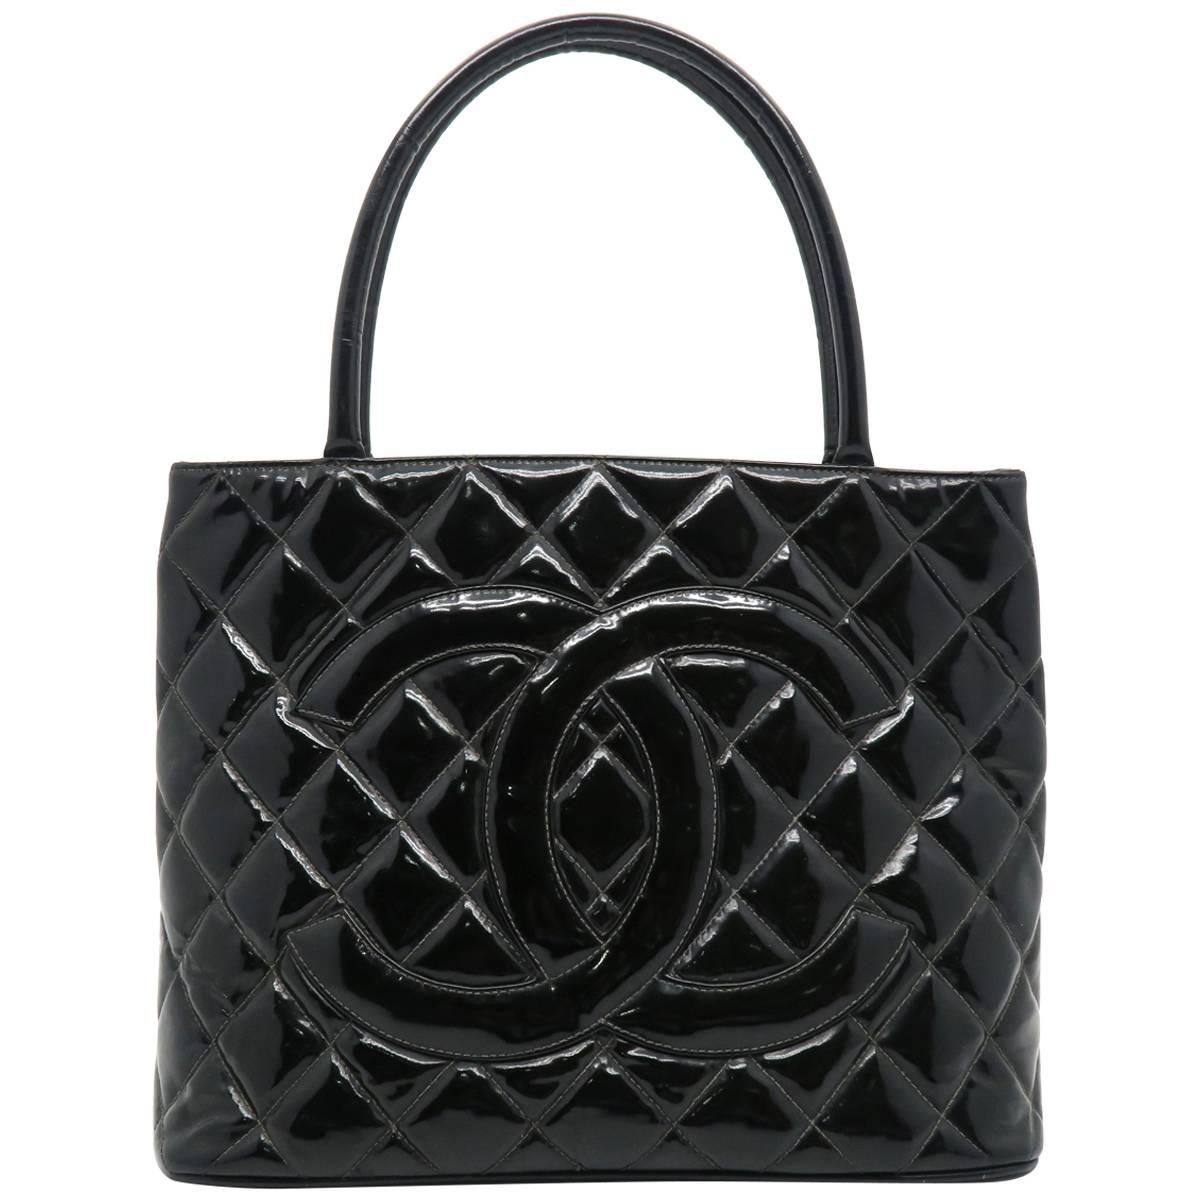 Chanel Black Quilted Patent Leather Handbag For Sale